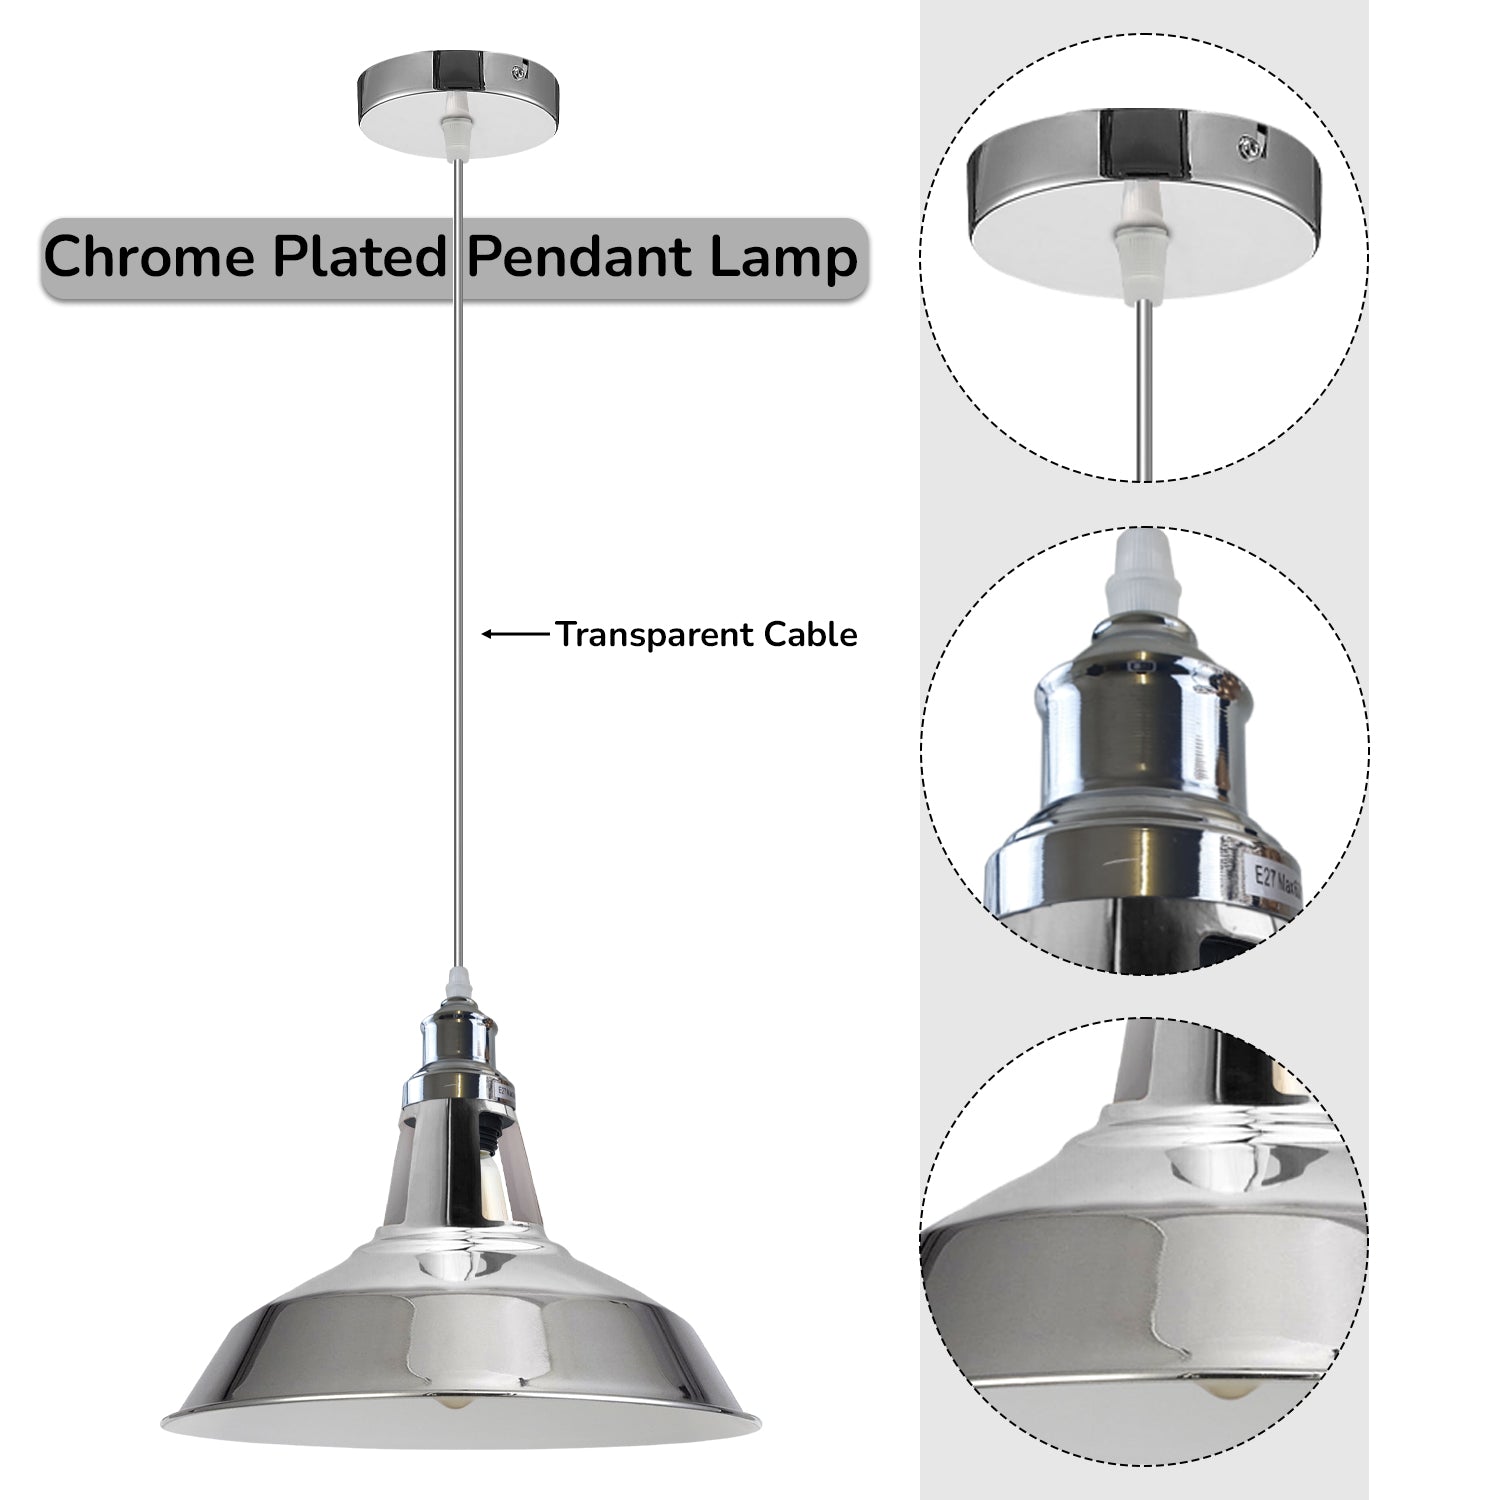 Chrome plated pendent lamp